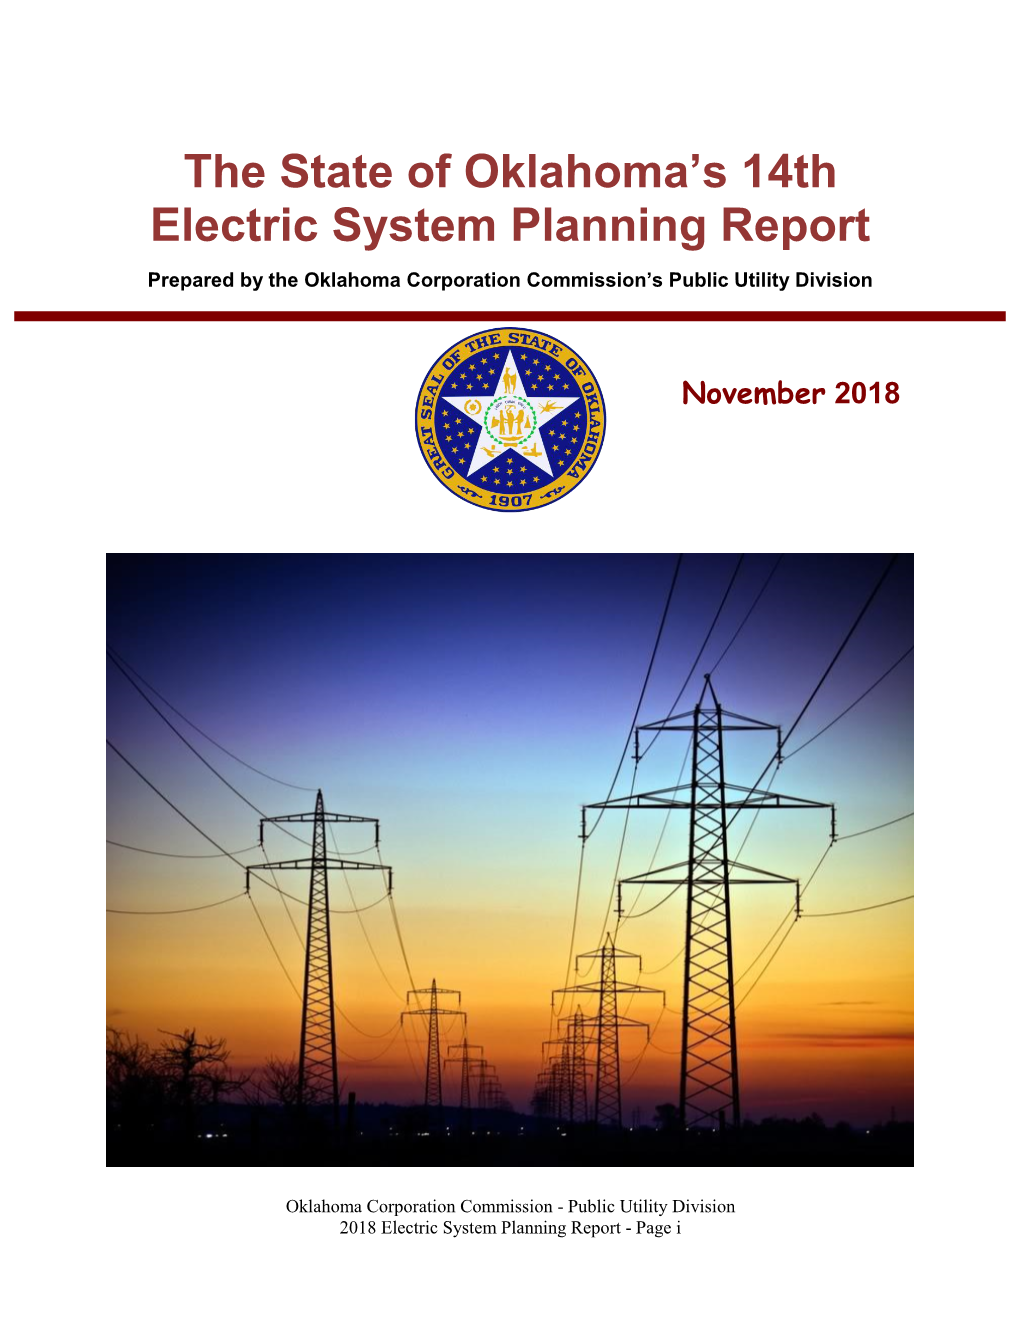 The State of Oklahoma's 14Th Electric System Planning Report